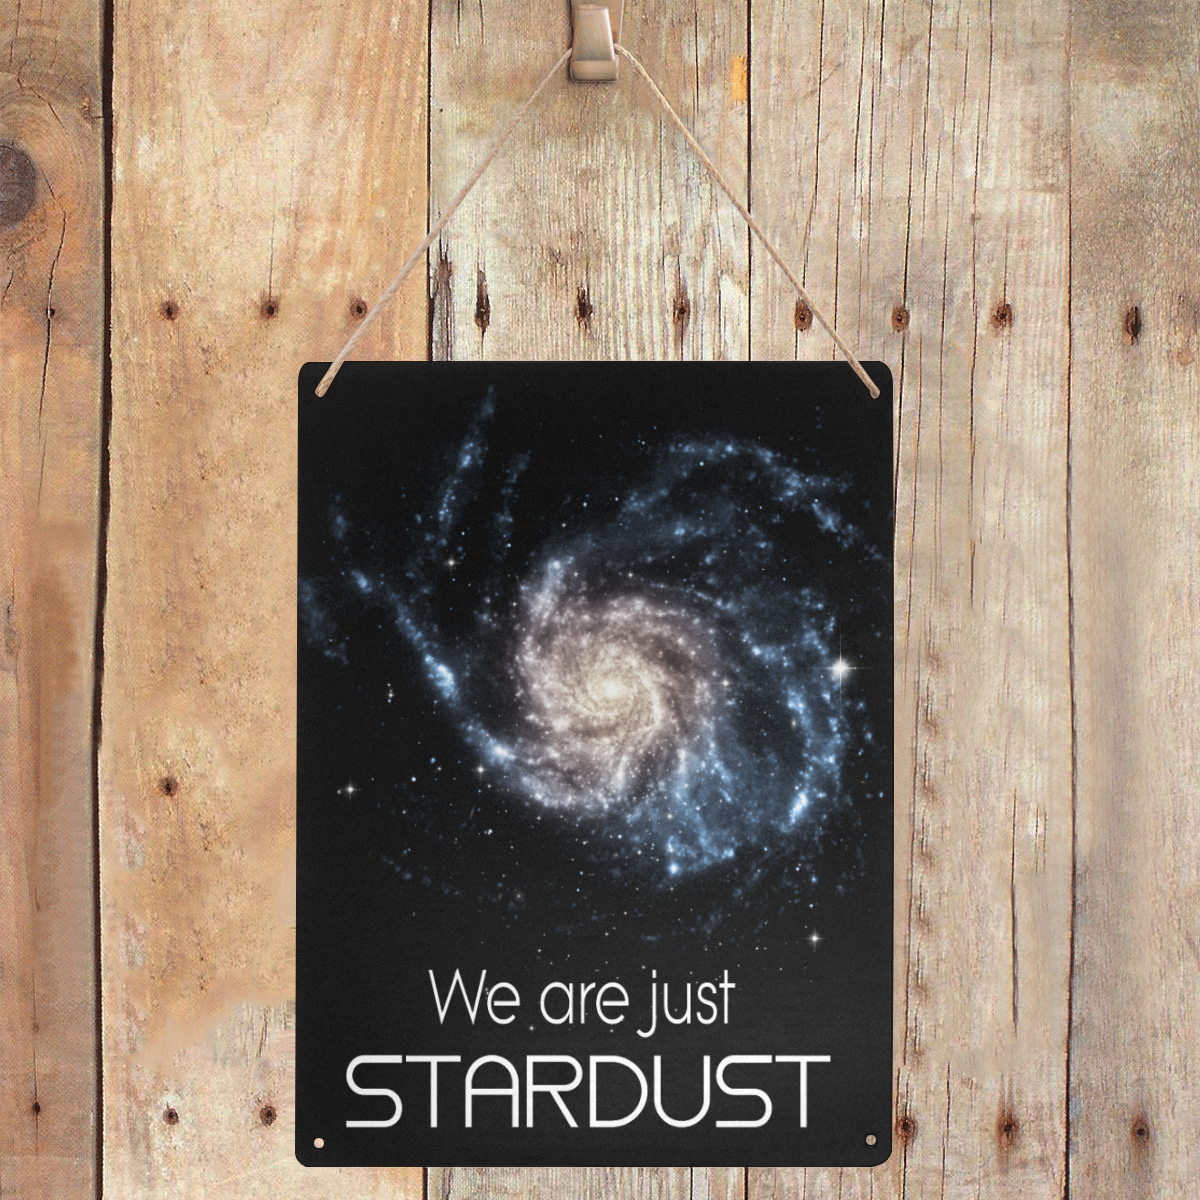 We are Stardust Metal Tin Sign 12"x16"